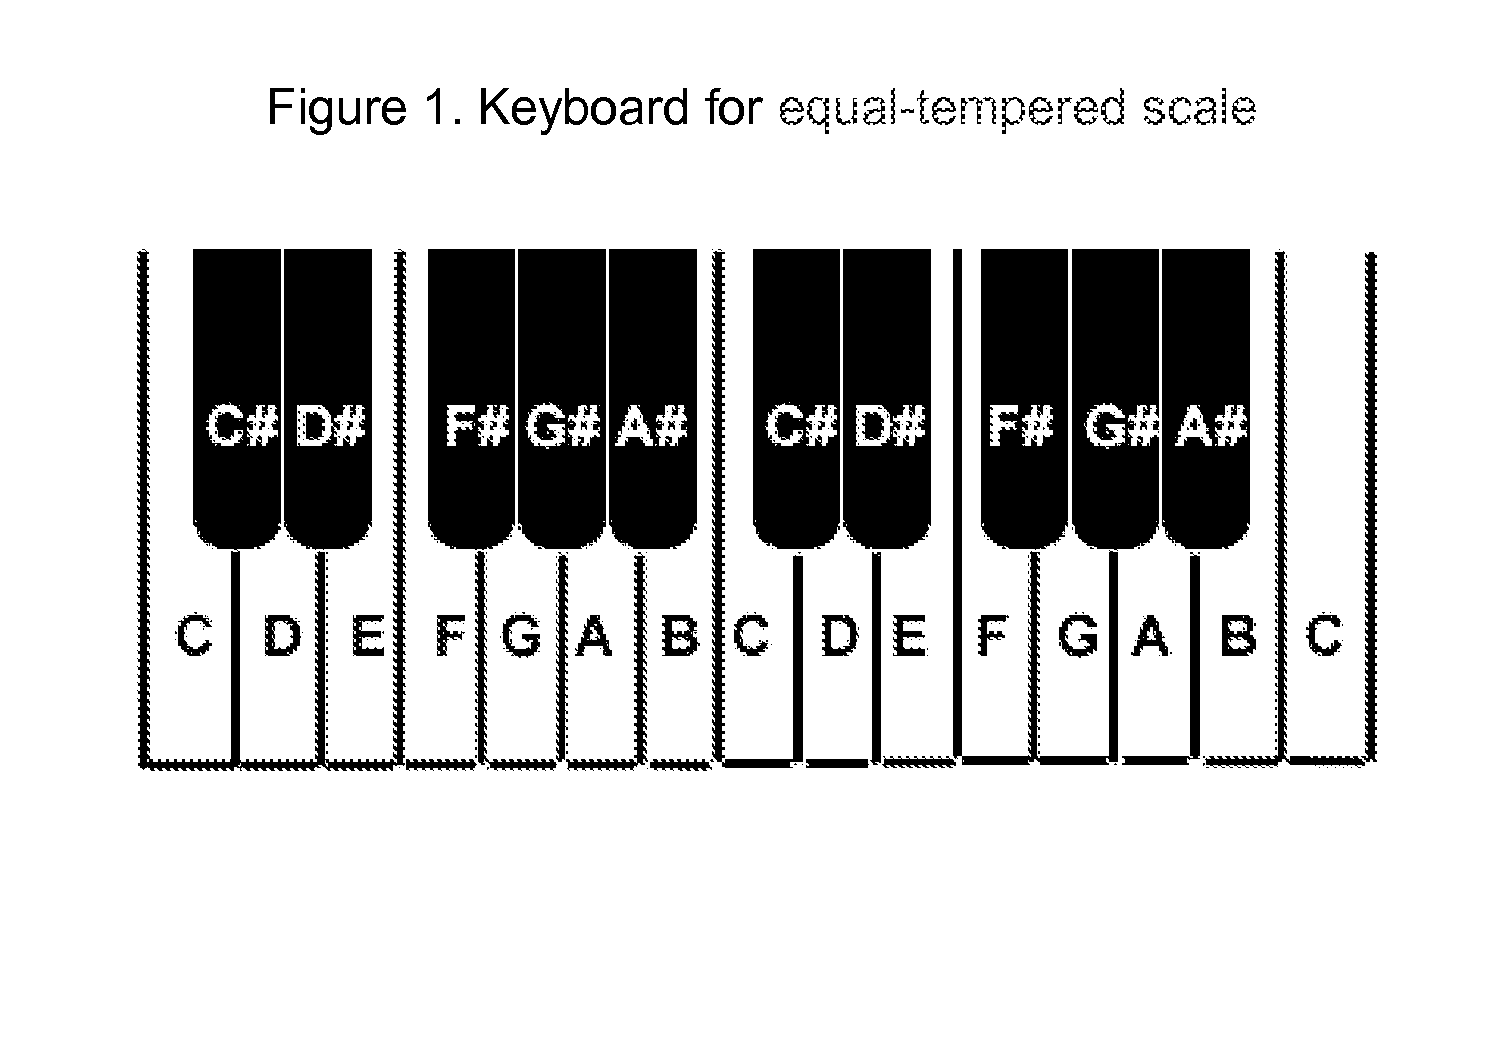 Musical keyboard in the form of a two-dimensional matrix